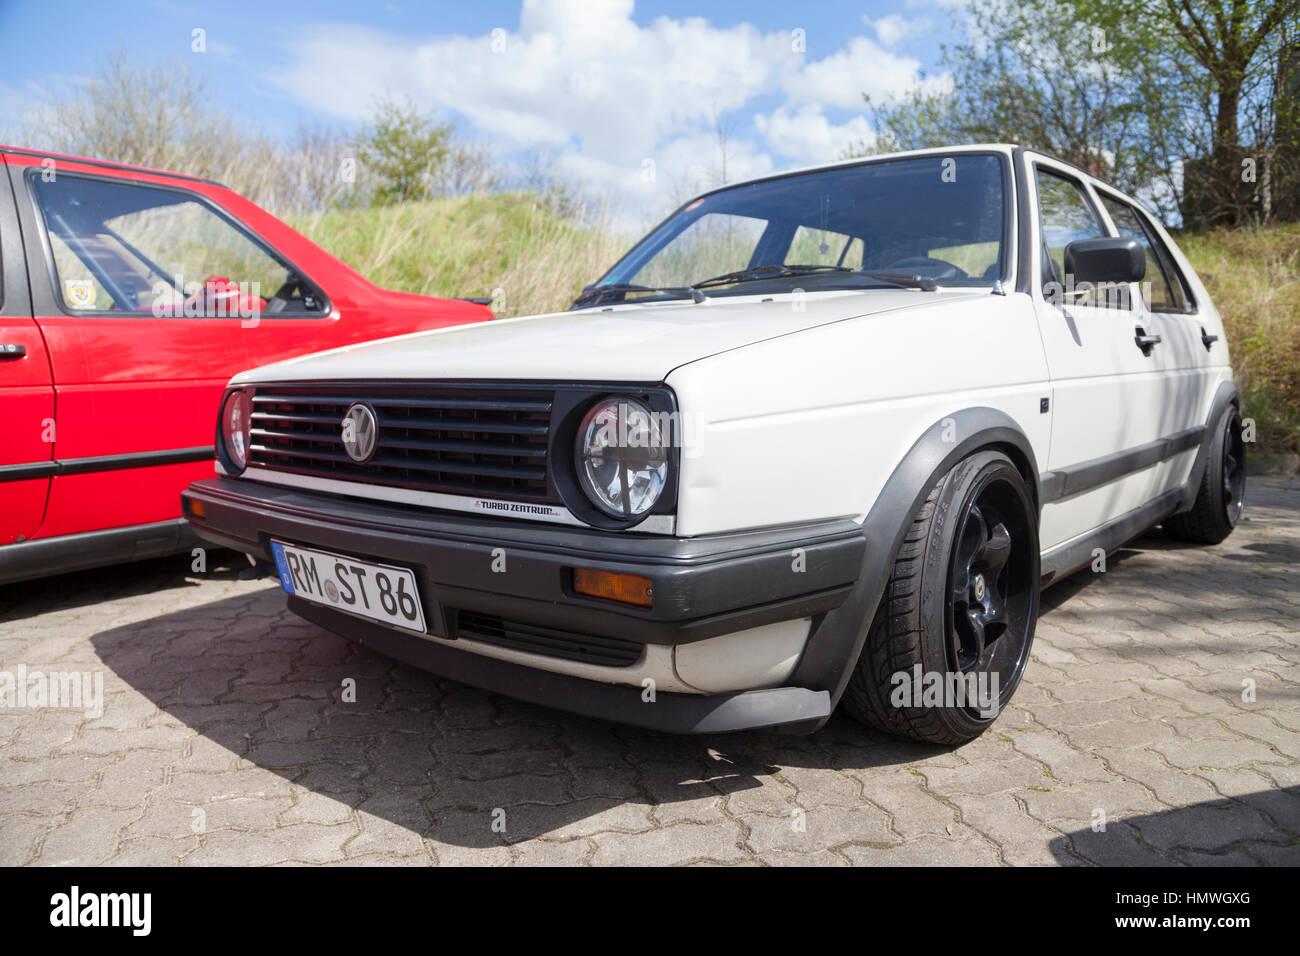 VOLKSWAGEN GOLF vw-golf-2-tuning Used - the parking